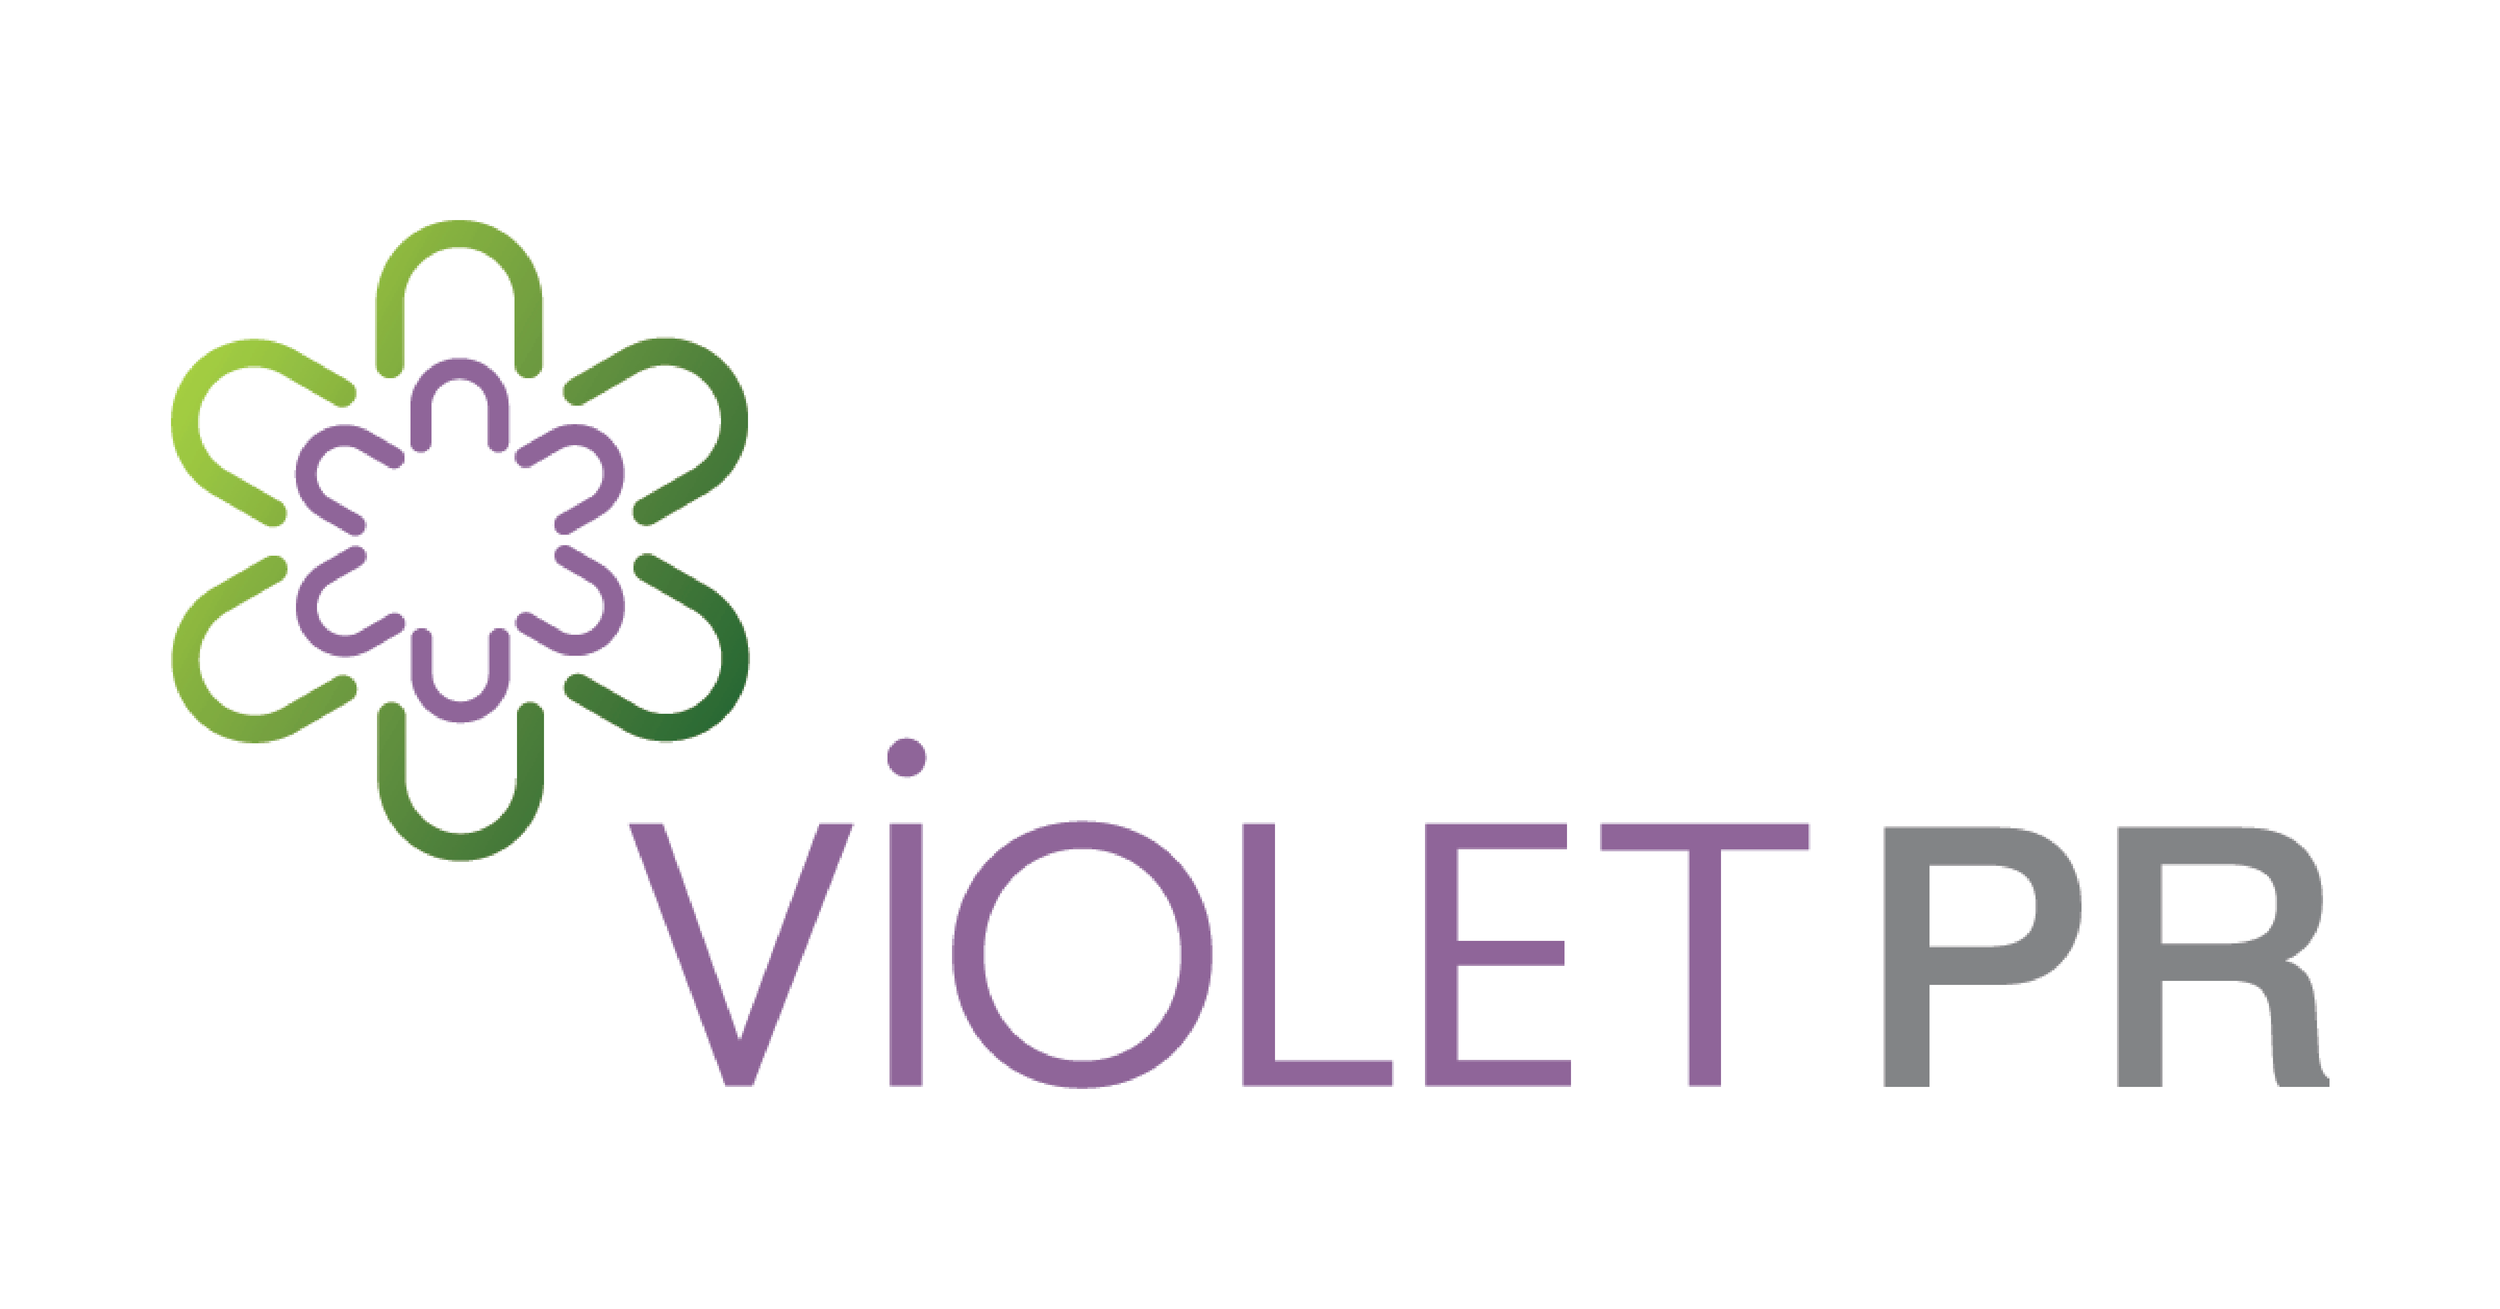 In the past three years, Violet PR has won more than 35 awards including 2022’s “Best Boutique Agency” by Bulldog Reporter. Logo courtesy of Violet PR.